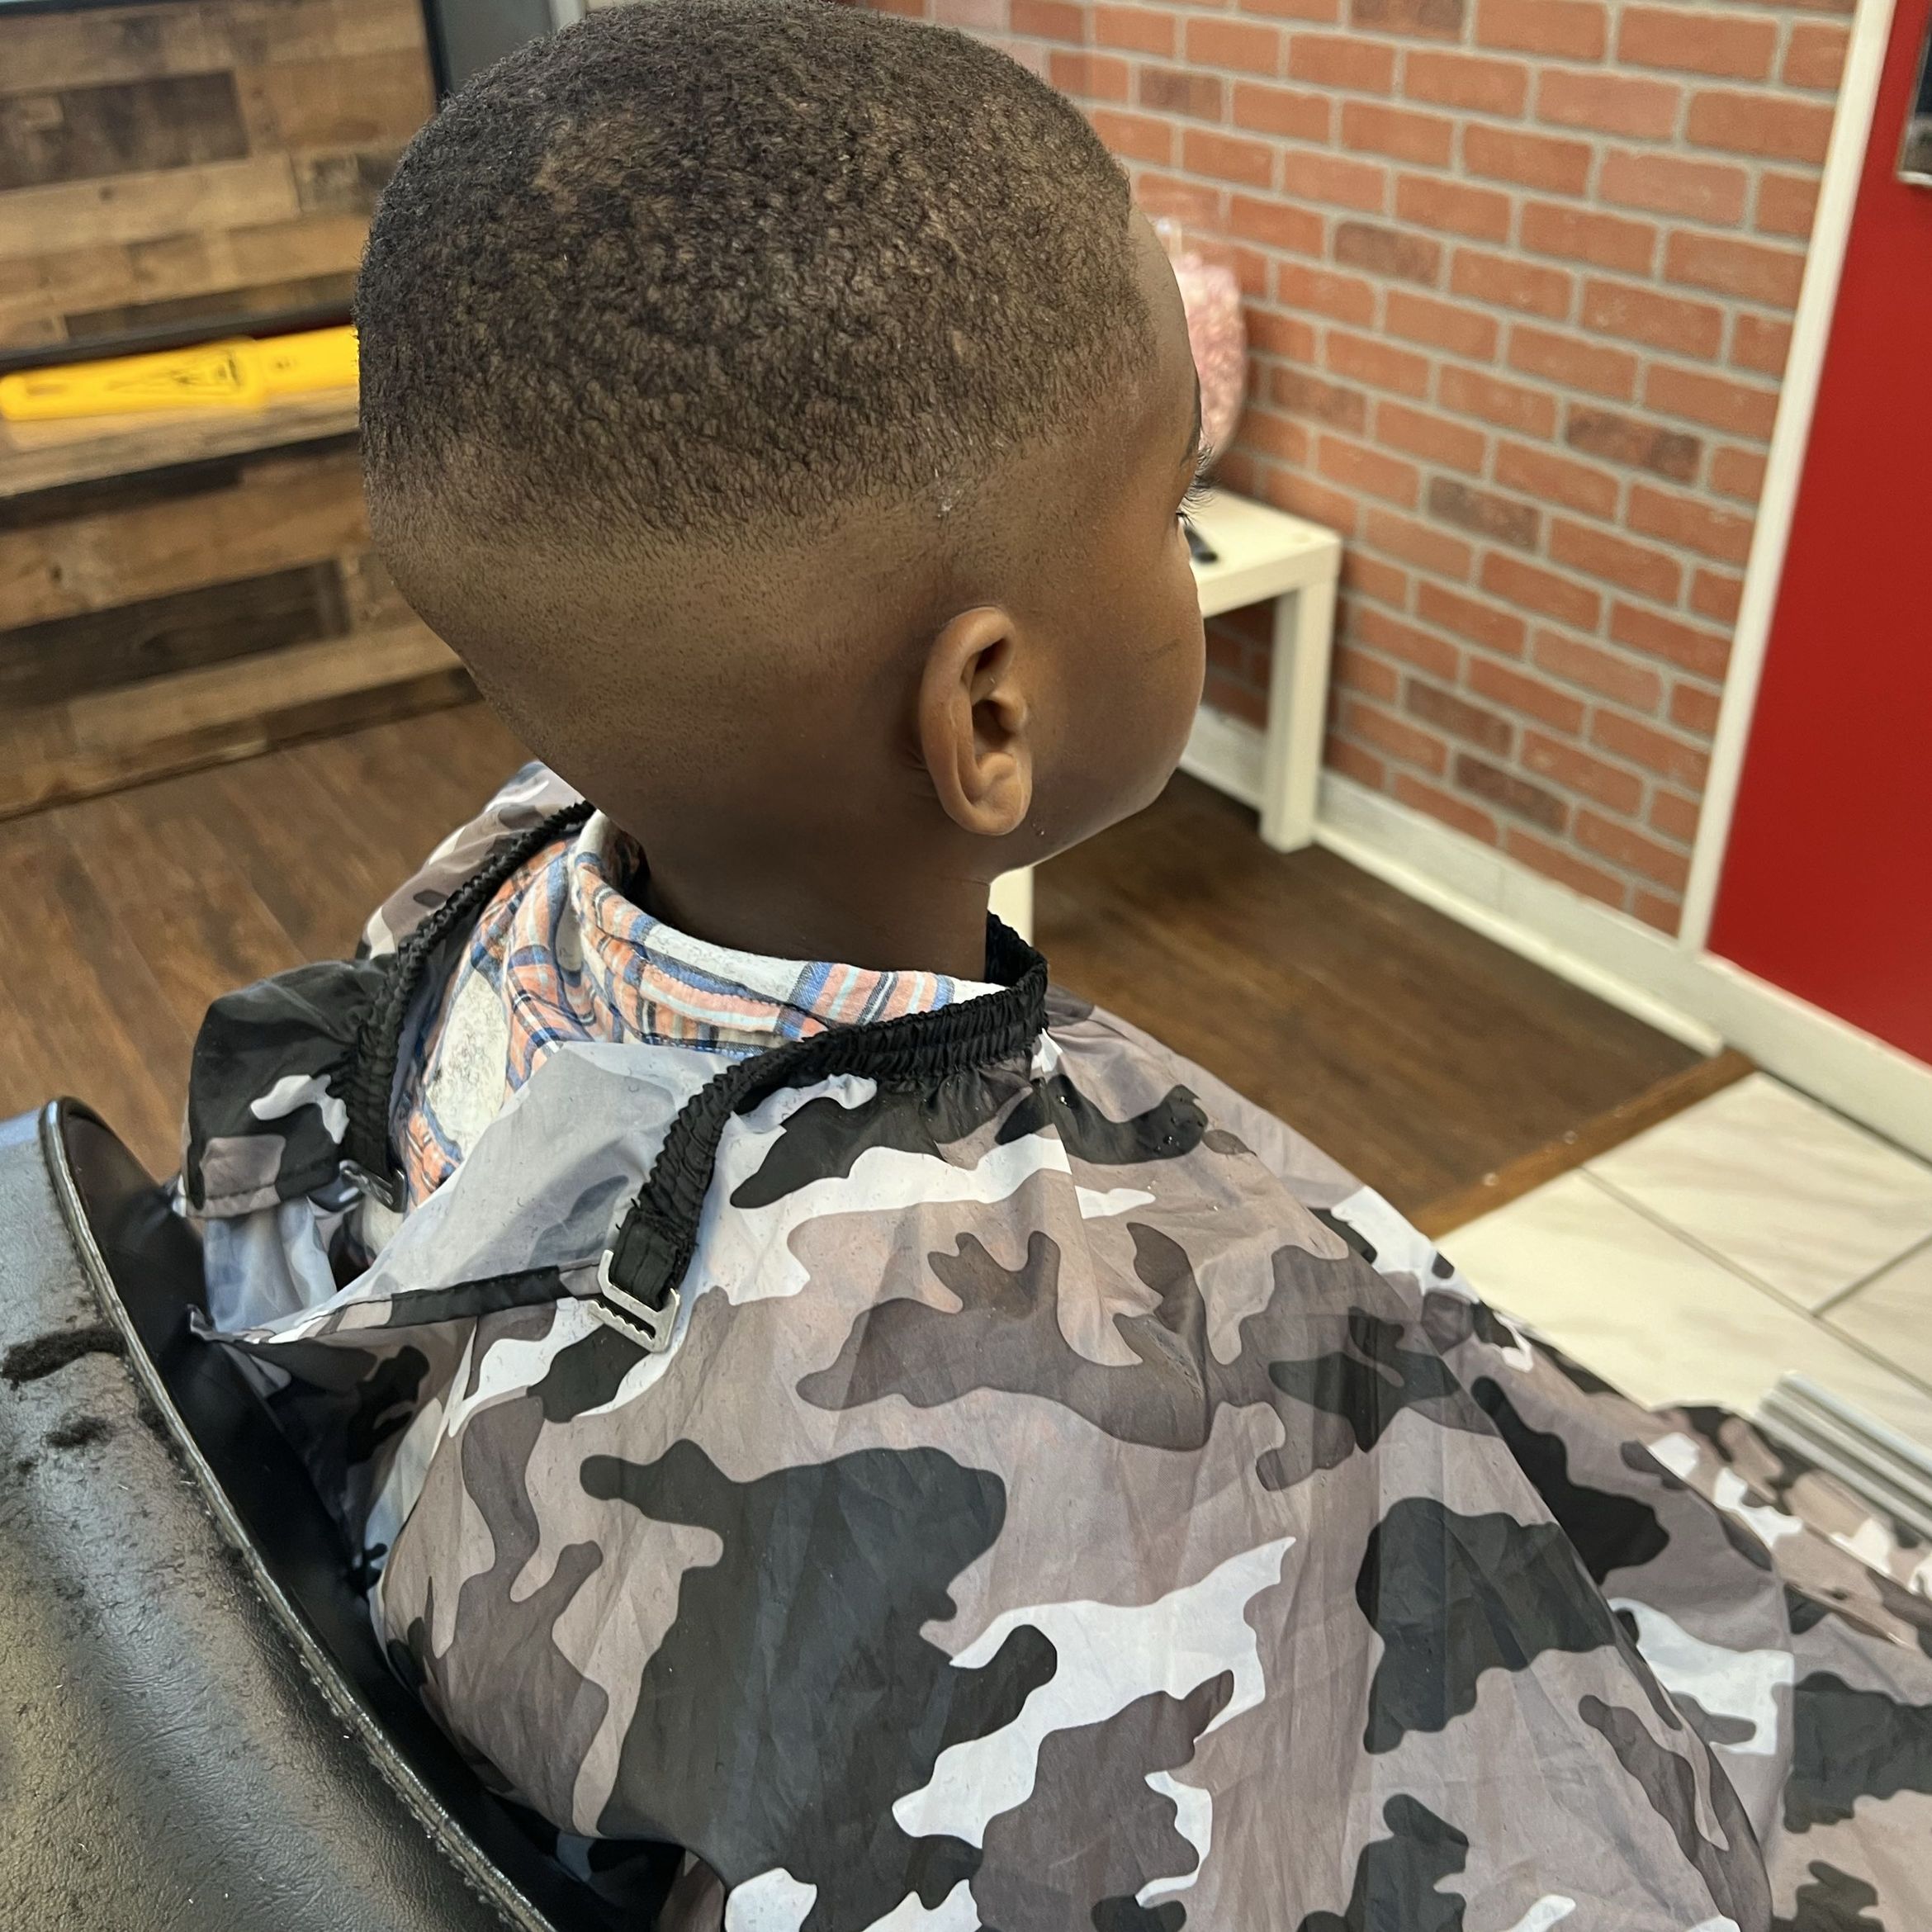 USA HAIRCUT, 605 Elk River Manor Dr, North East, 21901